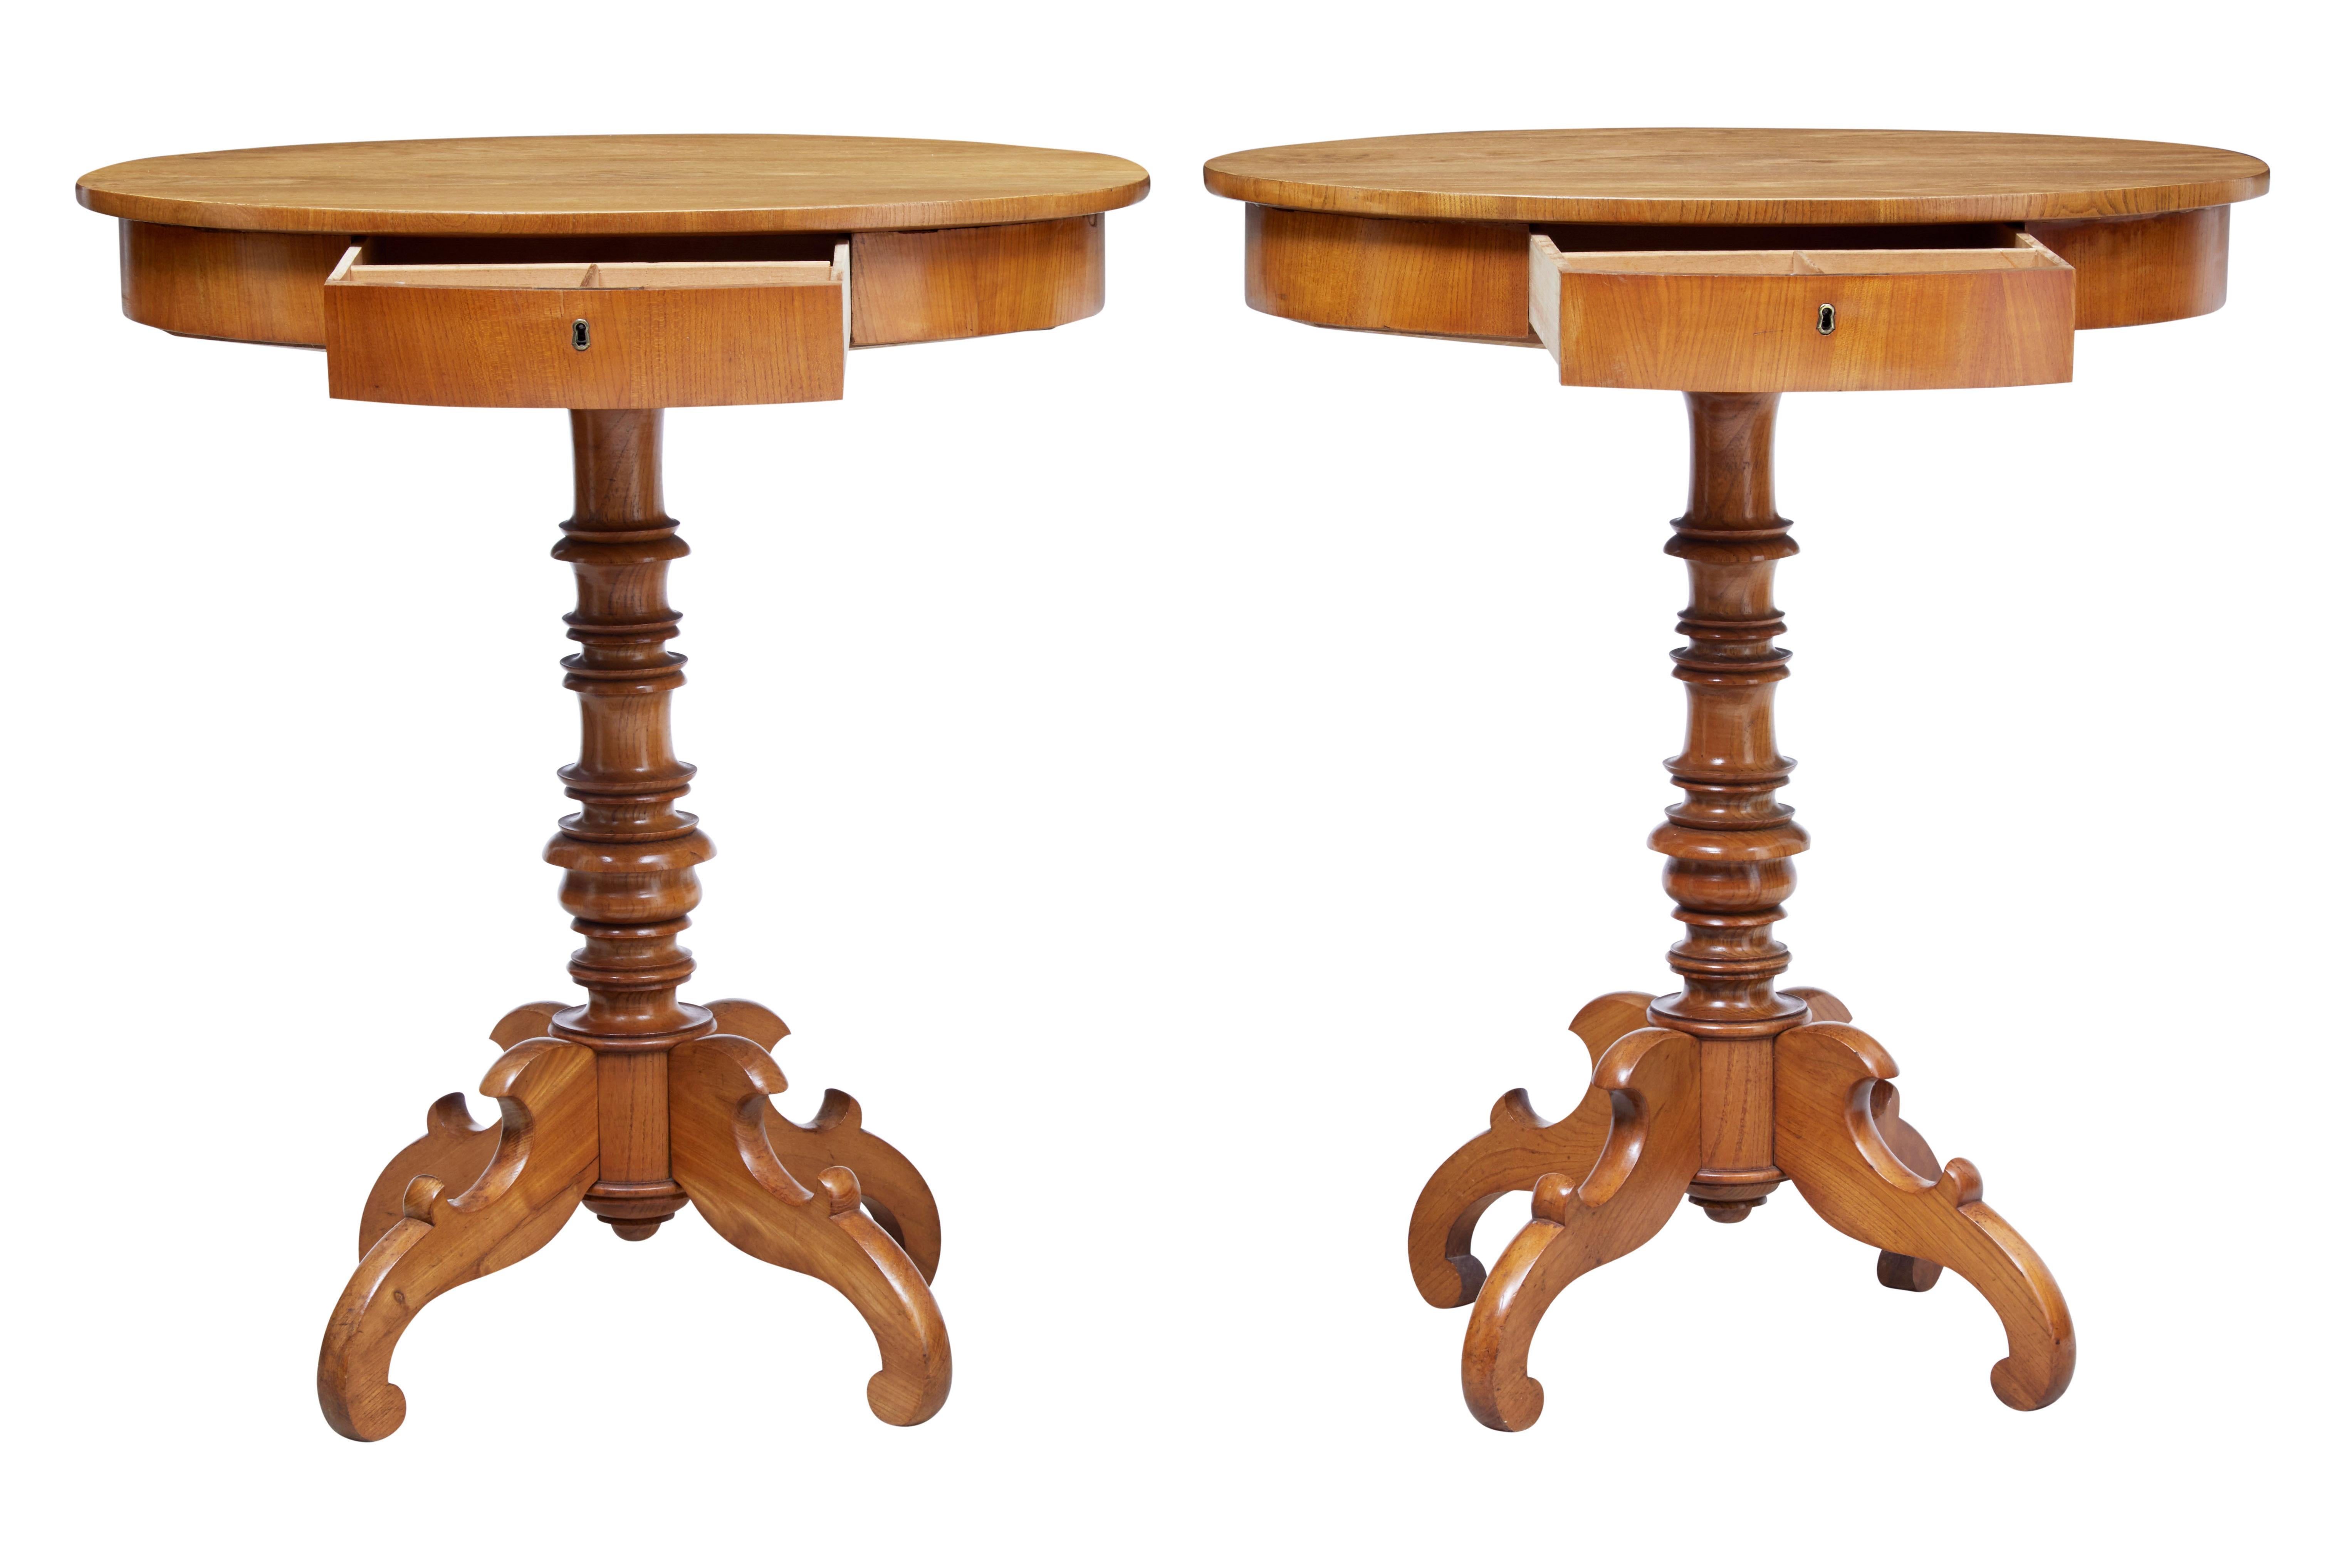 Good quality pair of elm occasional tables, circa 1890.

Oval tops with single drawer below which are fitted with partitions. Turned stem base, standing on 4 shaped legs.

Ideal for a pair of lamp tables.

Slight variation in color on the